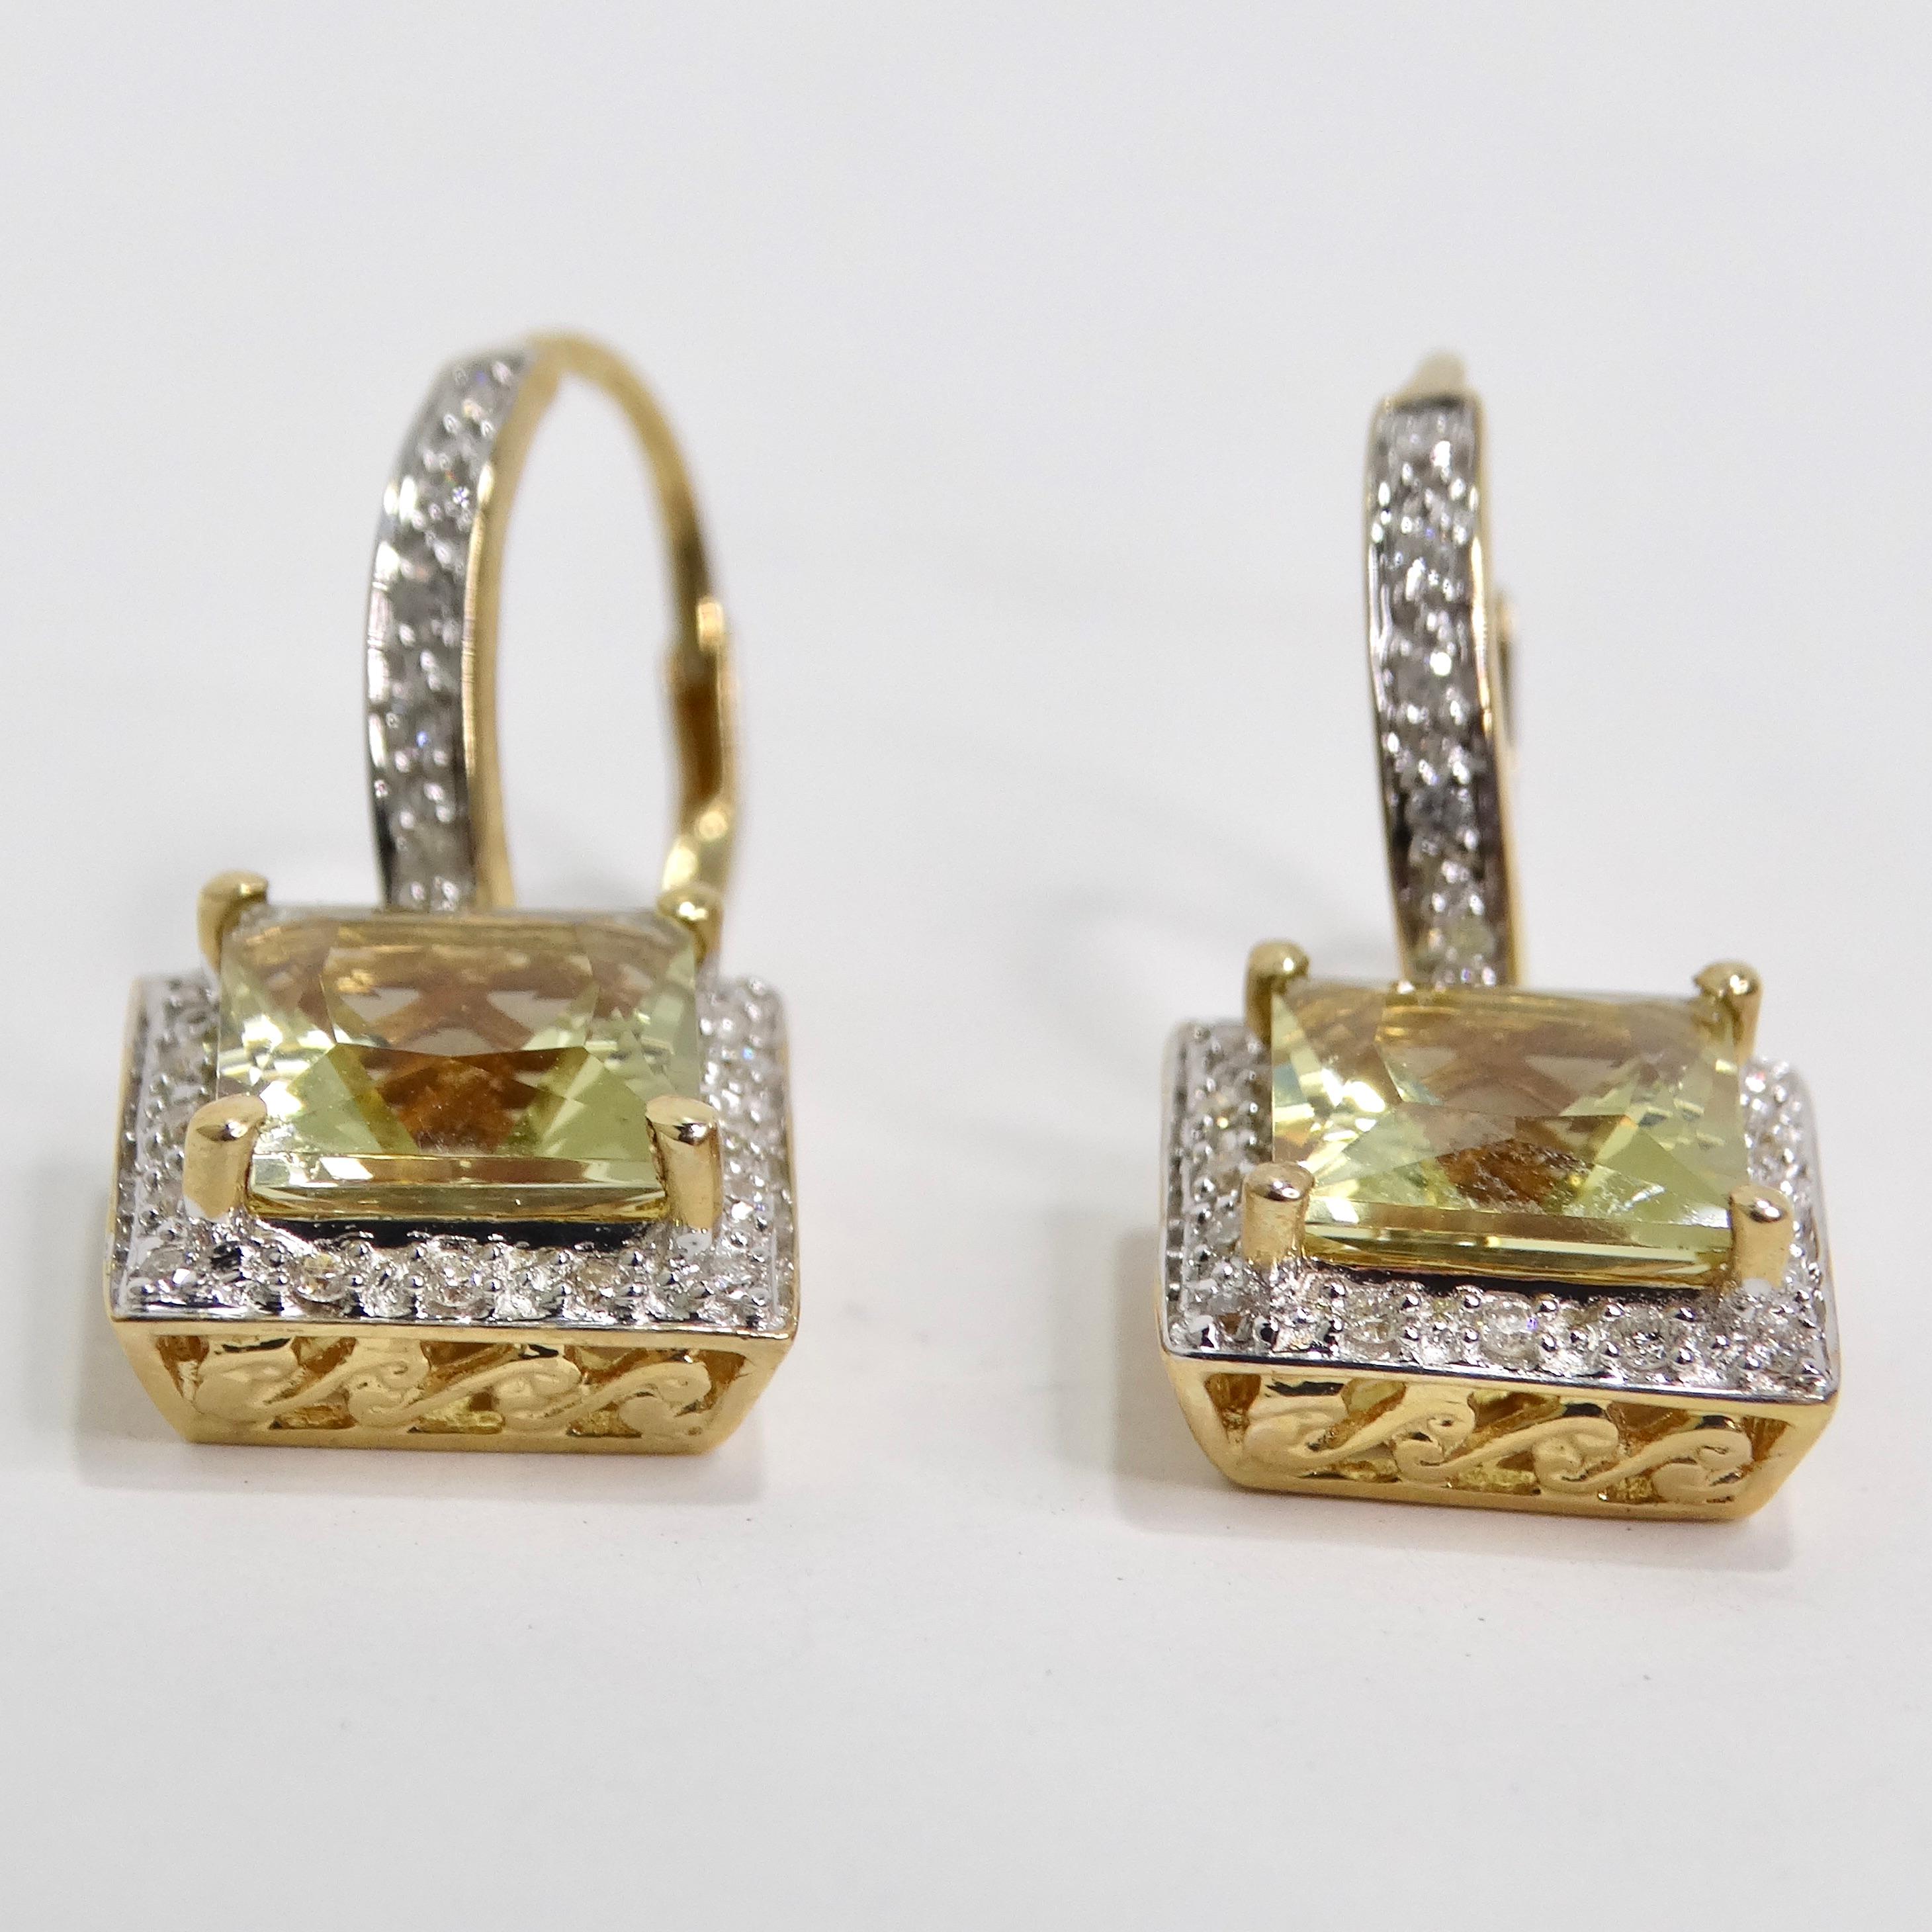 14K Gold Citrine Diamond Earrings In Excellent Condition For Sale In Scottsdale, AZ